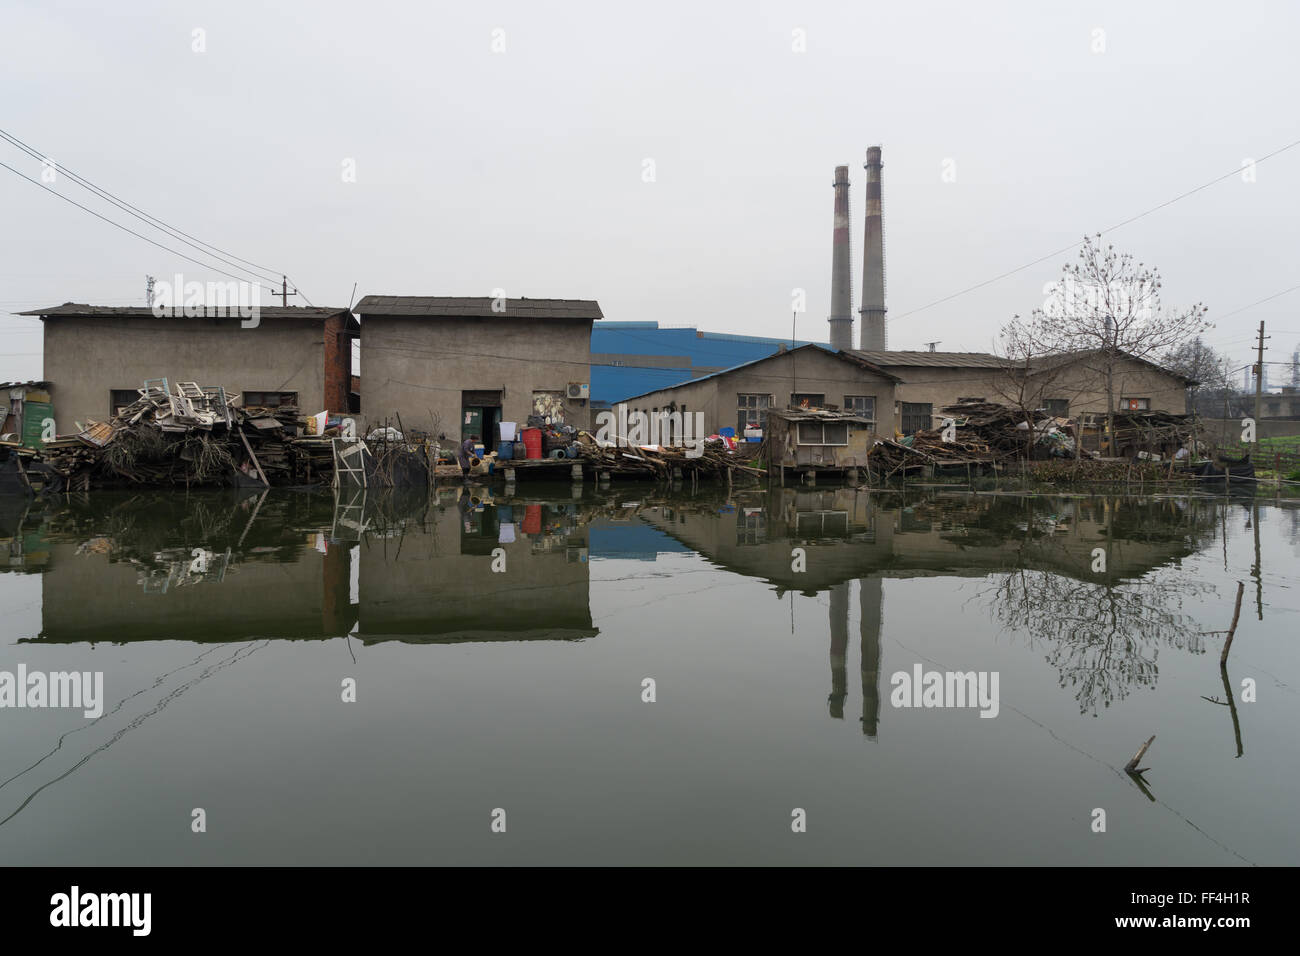 Small farm in a polluted environment in Xiangtan, Hunan, China Stock Photo